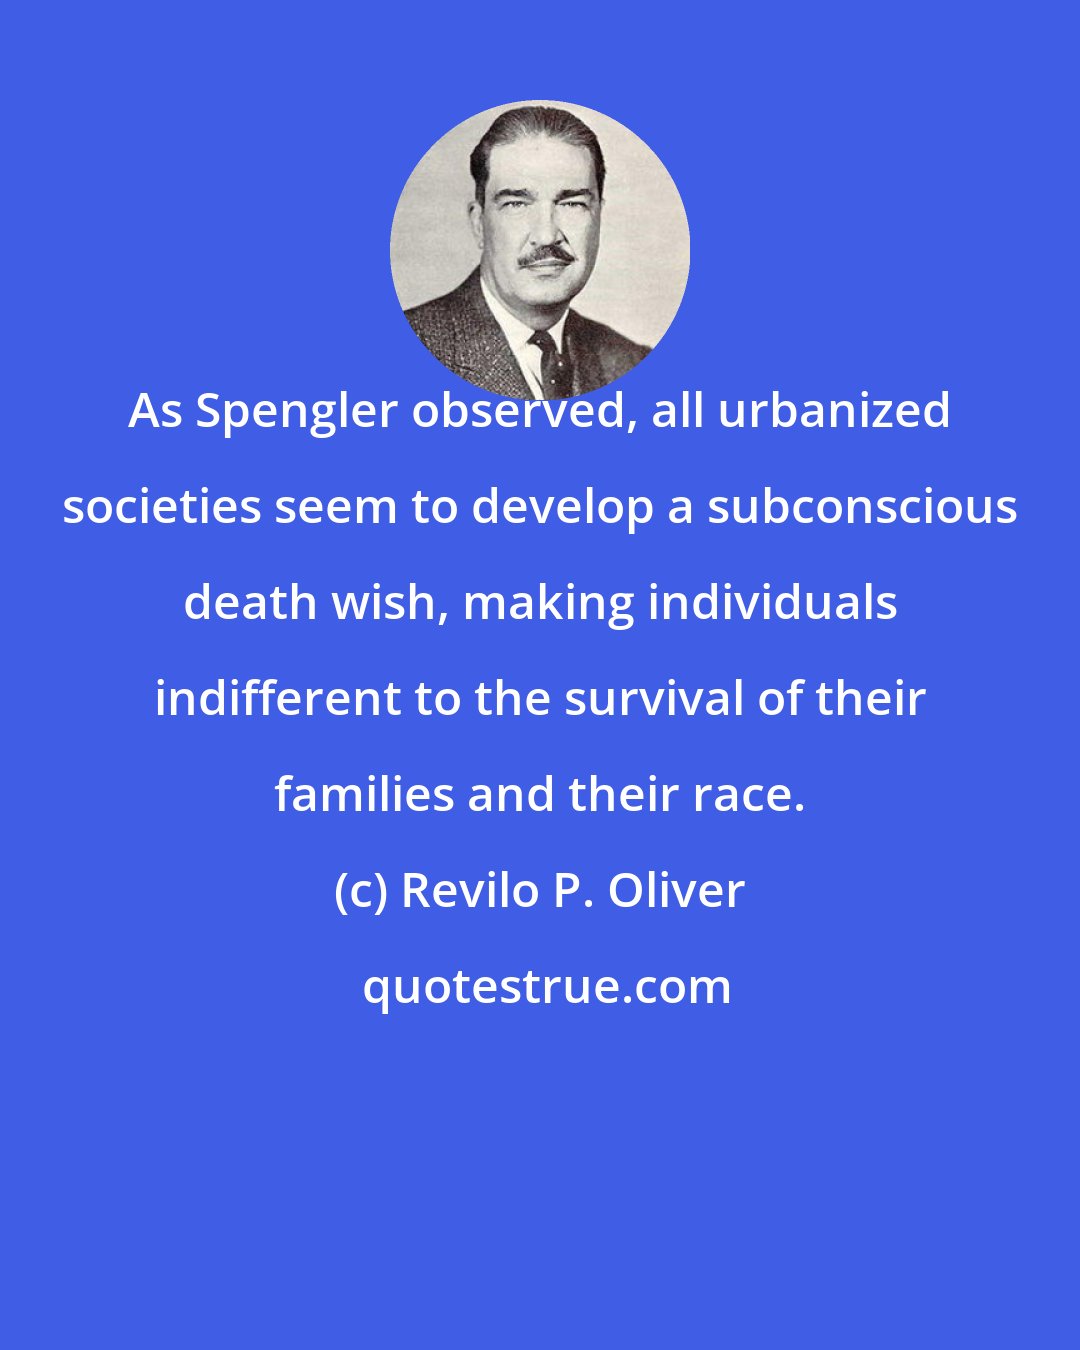 Revilo P. Oliver: As Spengler observed, all urbanized societies seem to develop a subconscious death wish, making individuals indifferent to the survival of their families and their race.